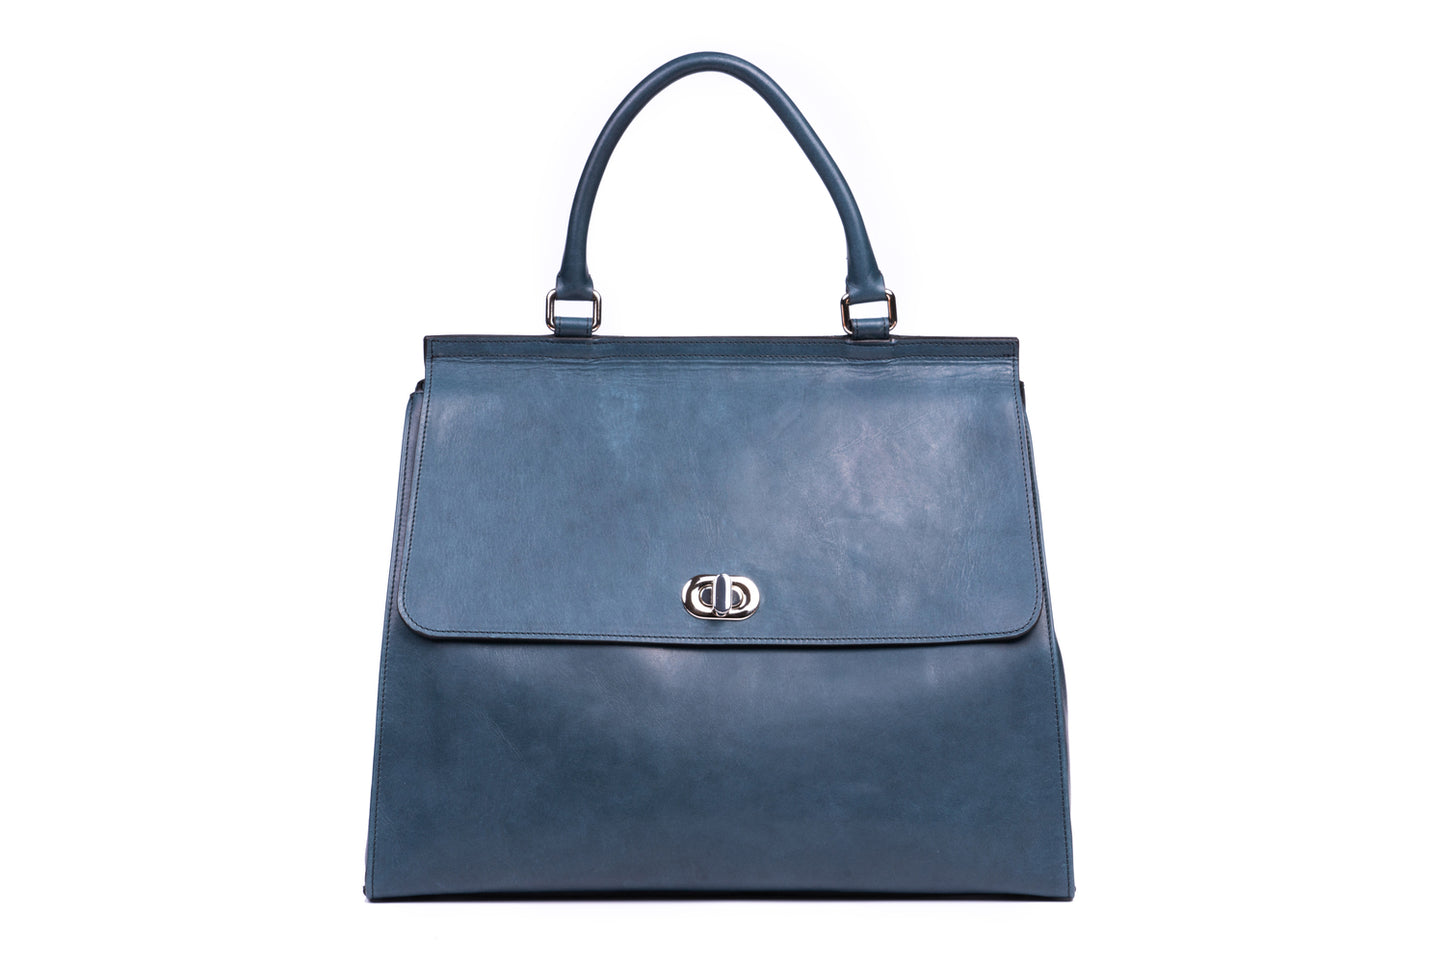 Eli model bag, semi-rigid by hand or with removable shoulder strap